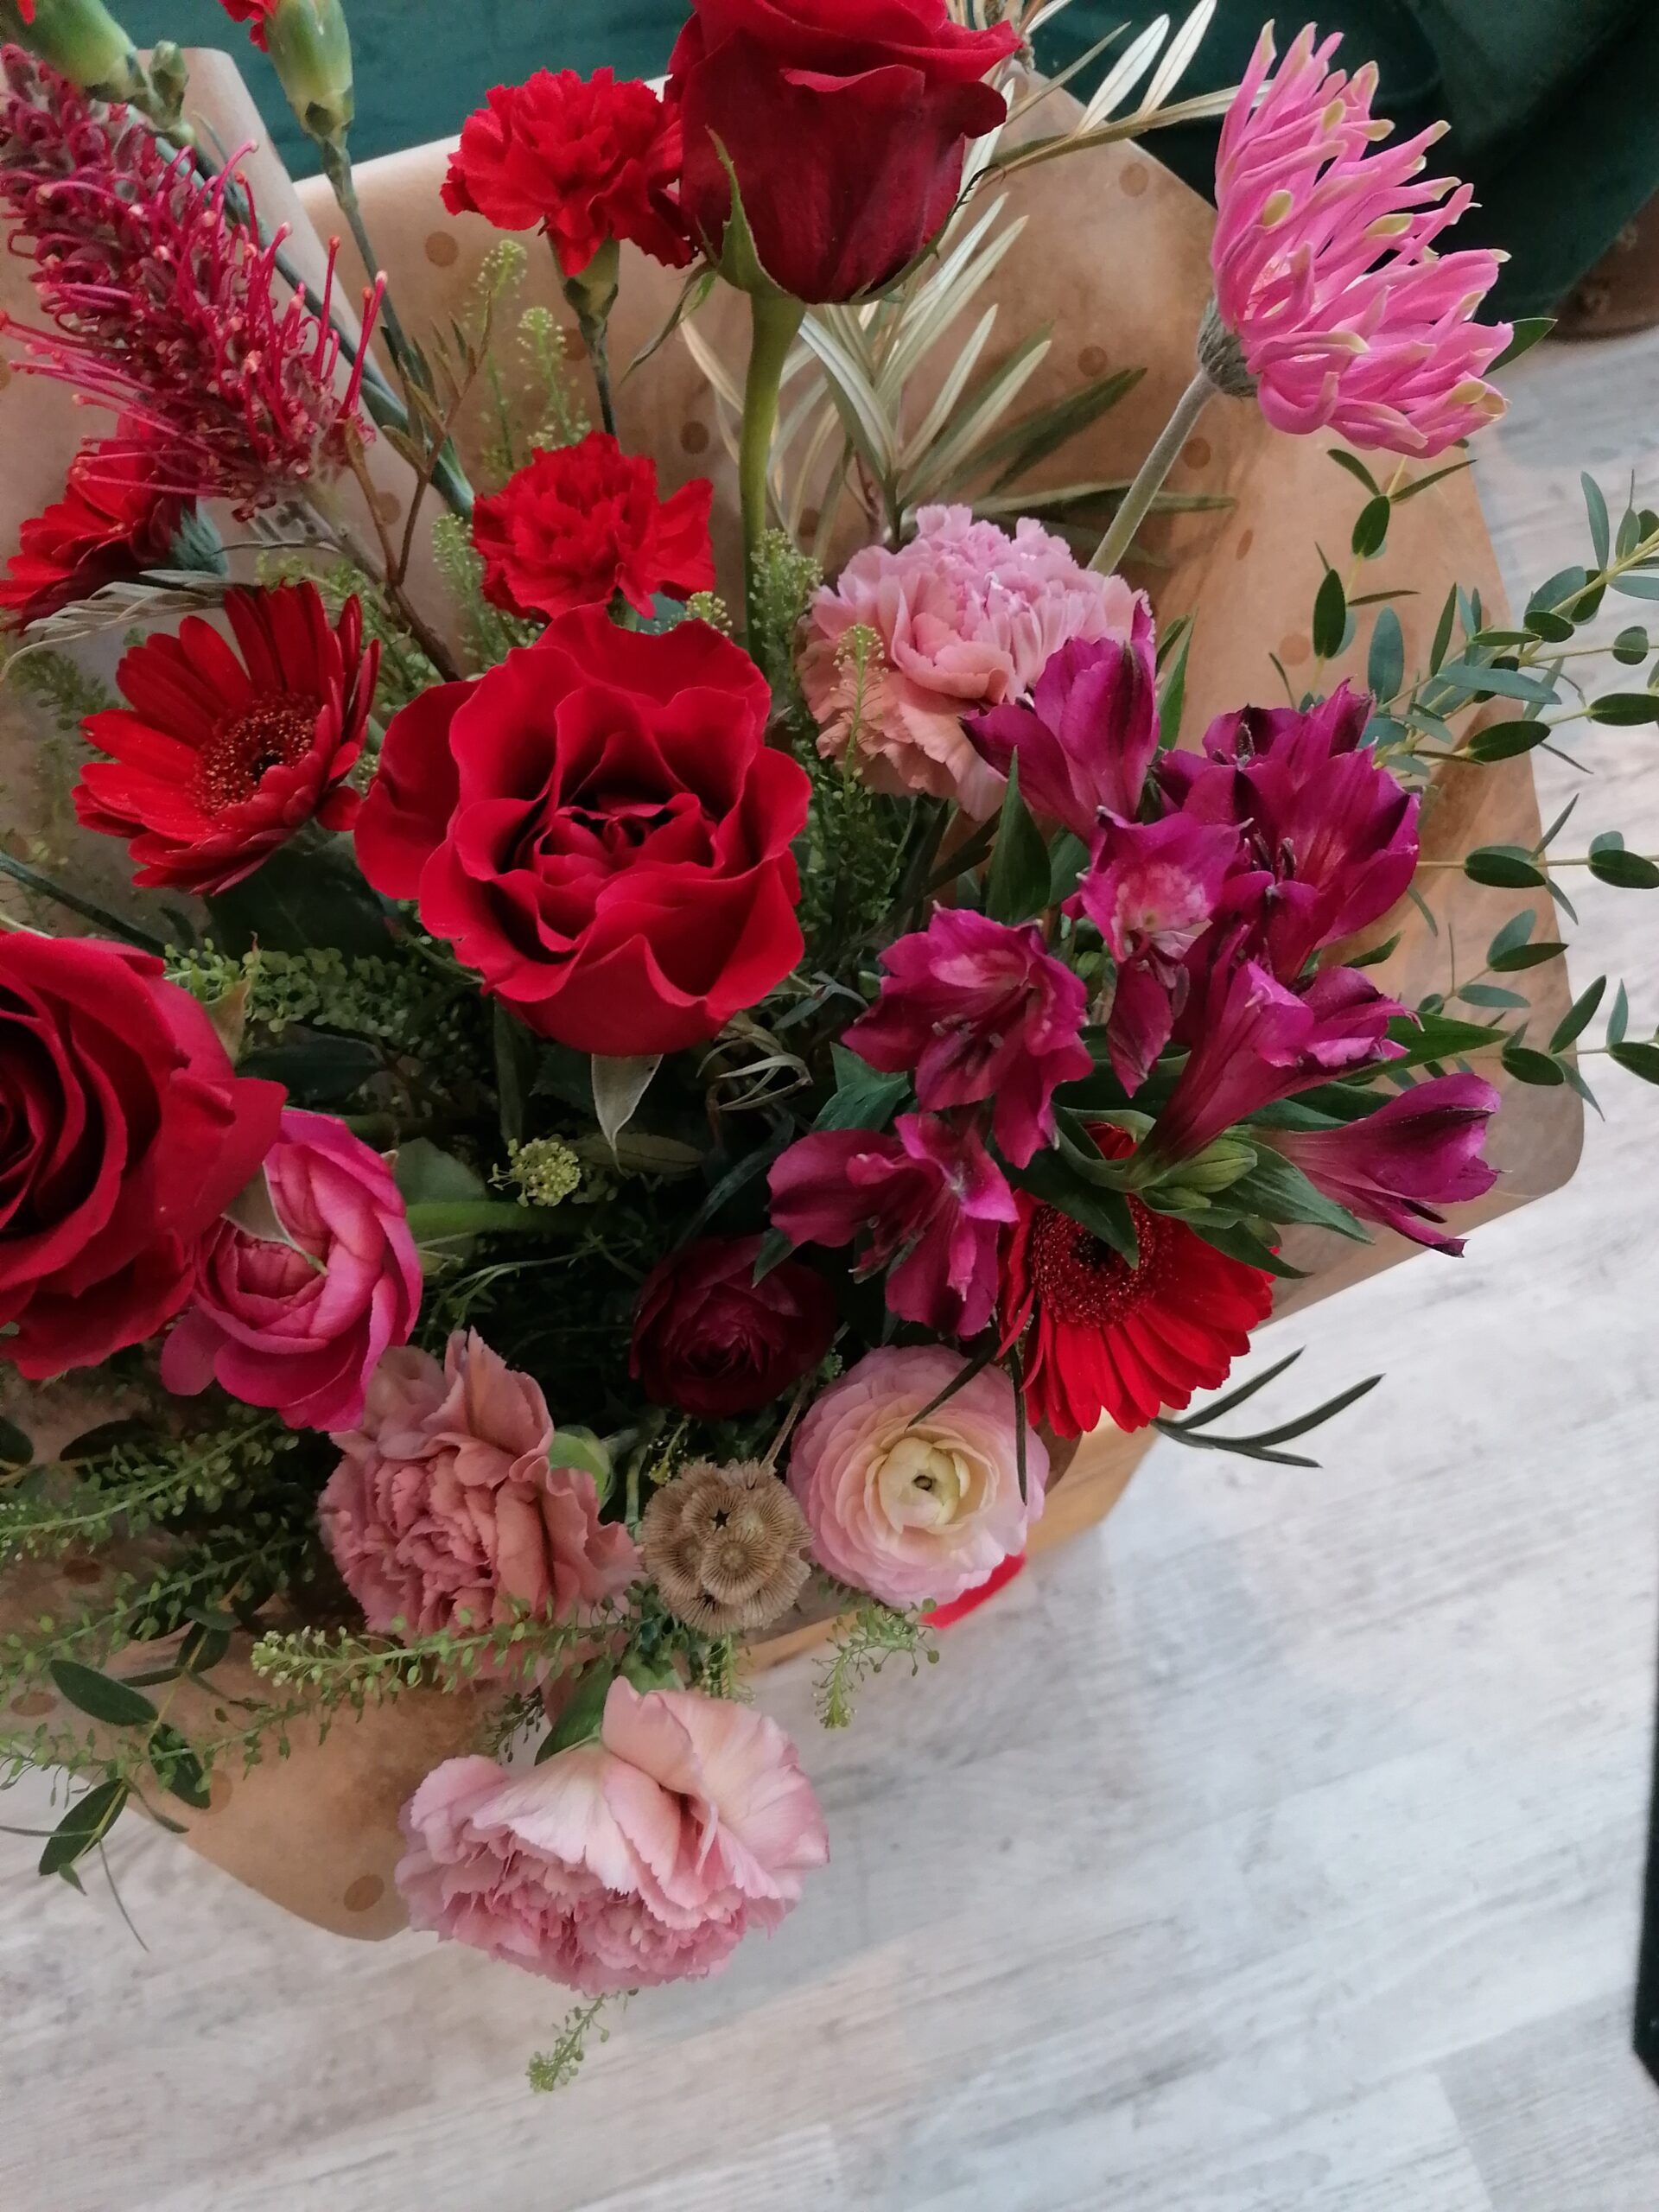 The combination of subtle pink with red roses works sensationally. A version for those undecided when there is a dilemma - Mixed bouquet or red roses?